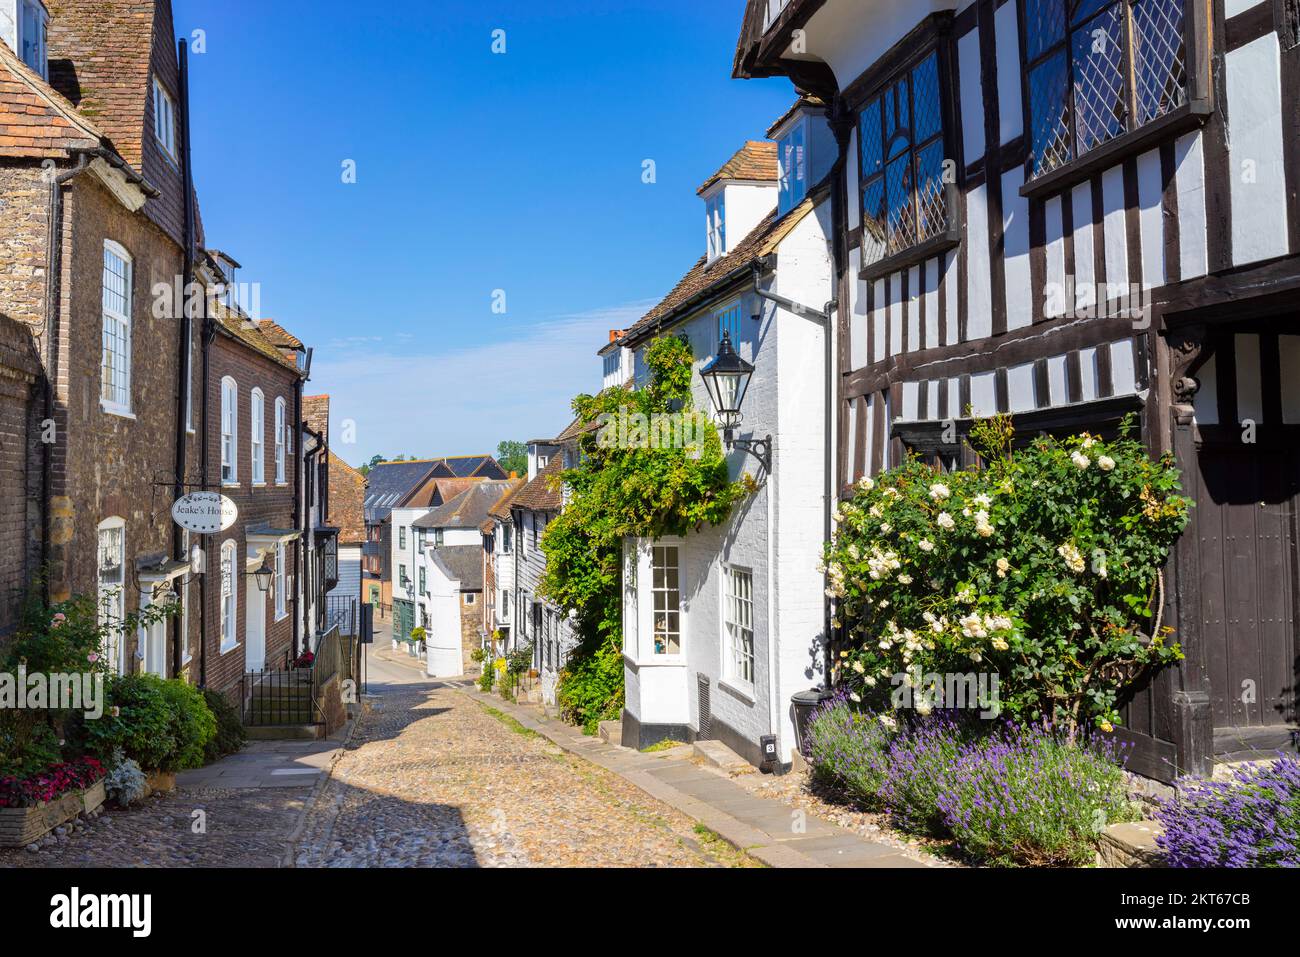 Rye East Sussex Rye Hartshorn House The Link or the Old Hospital and other medieval houses on historic Mermaid street Rye Sussex England UK GB Europe Stock Photo